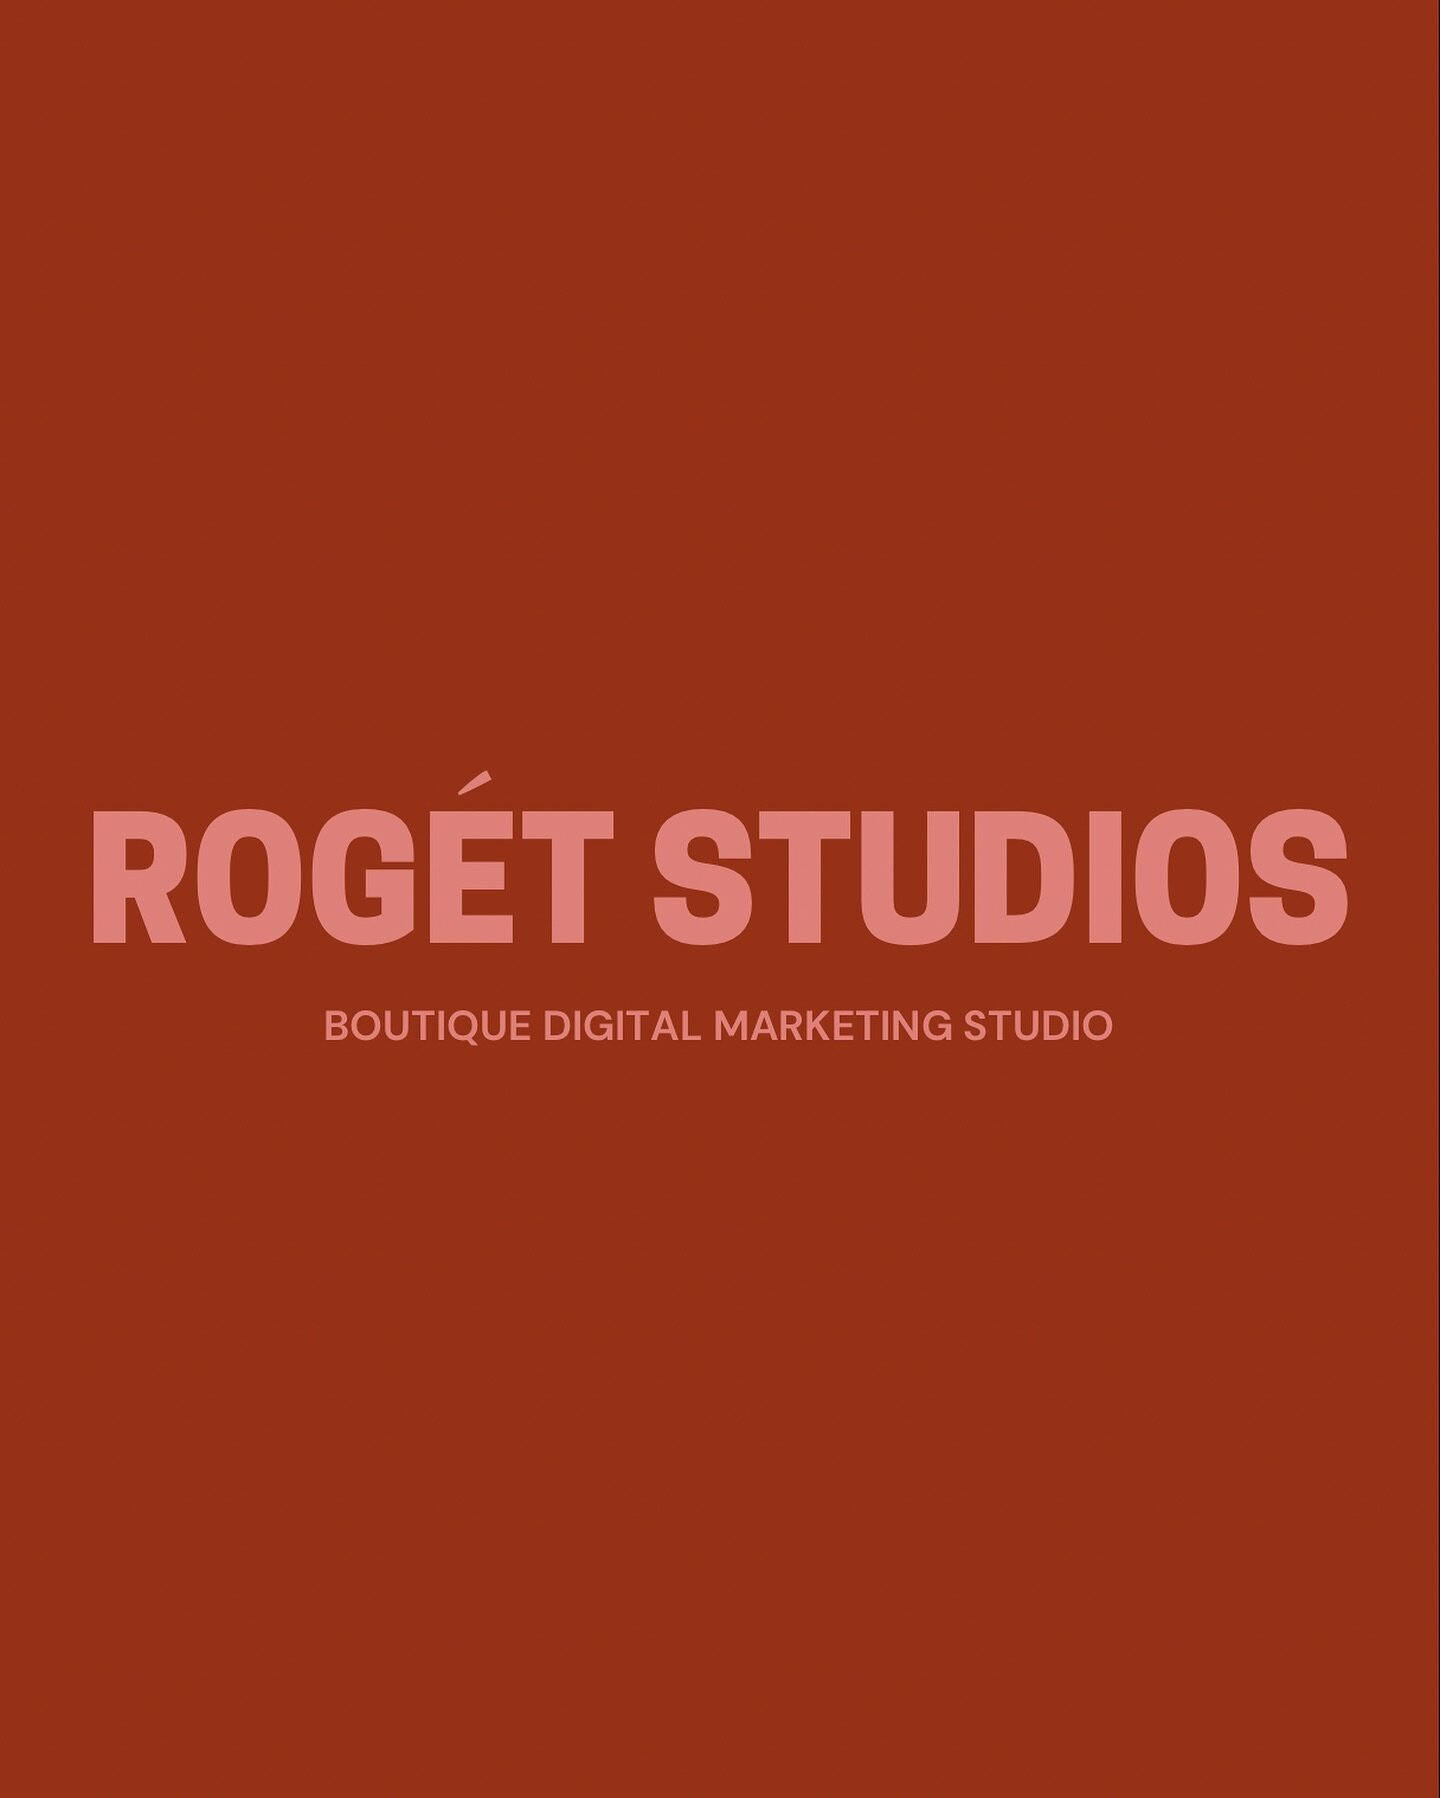 ☀️Something new is here! Rog&eacute;t Studios has gone through an official transformation, and has now become a boutique digital marketing studio. 

Specializing in social media management, influencer marketing, email/sms marketing &amp; web manageme